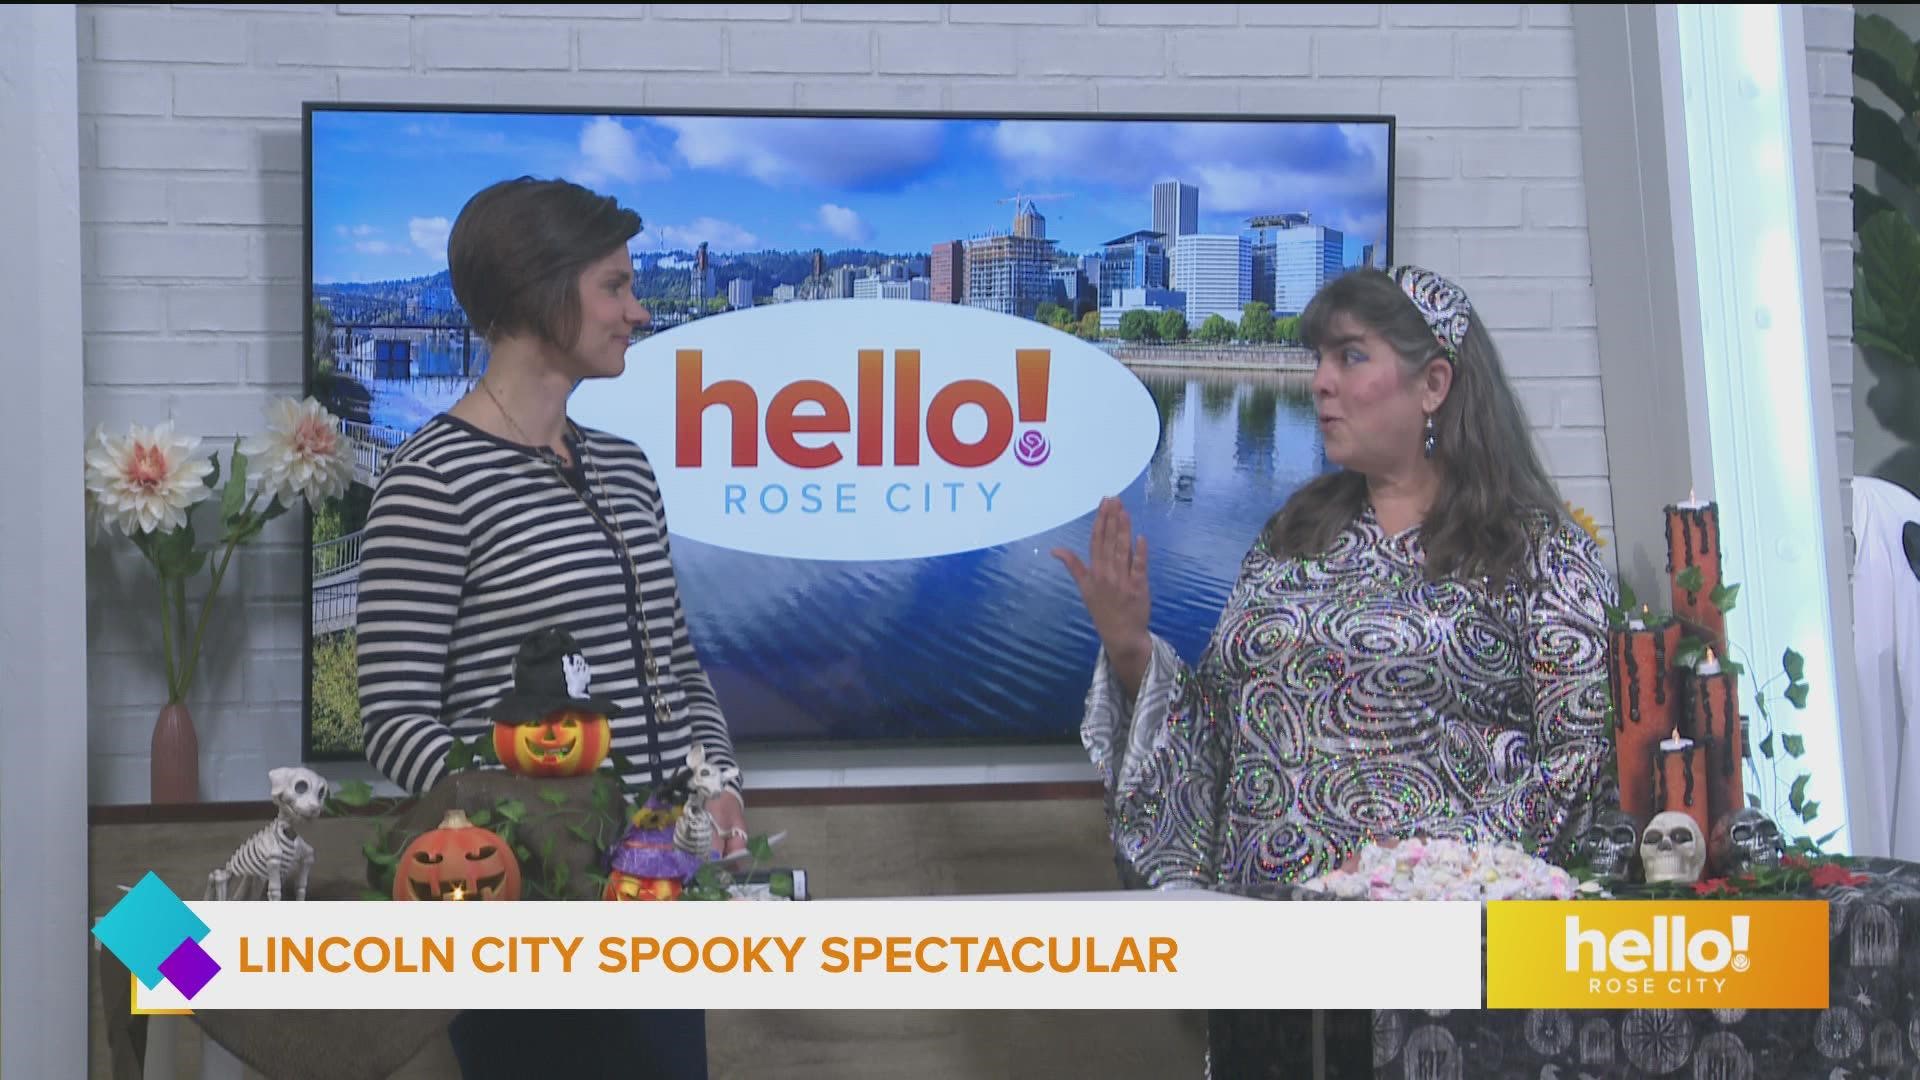 A fun way to celebrate Halloween with Lincoln City's Spooky Spectacular.